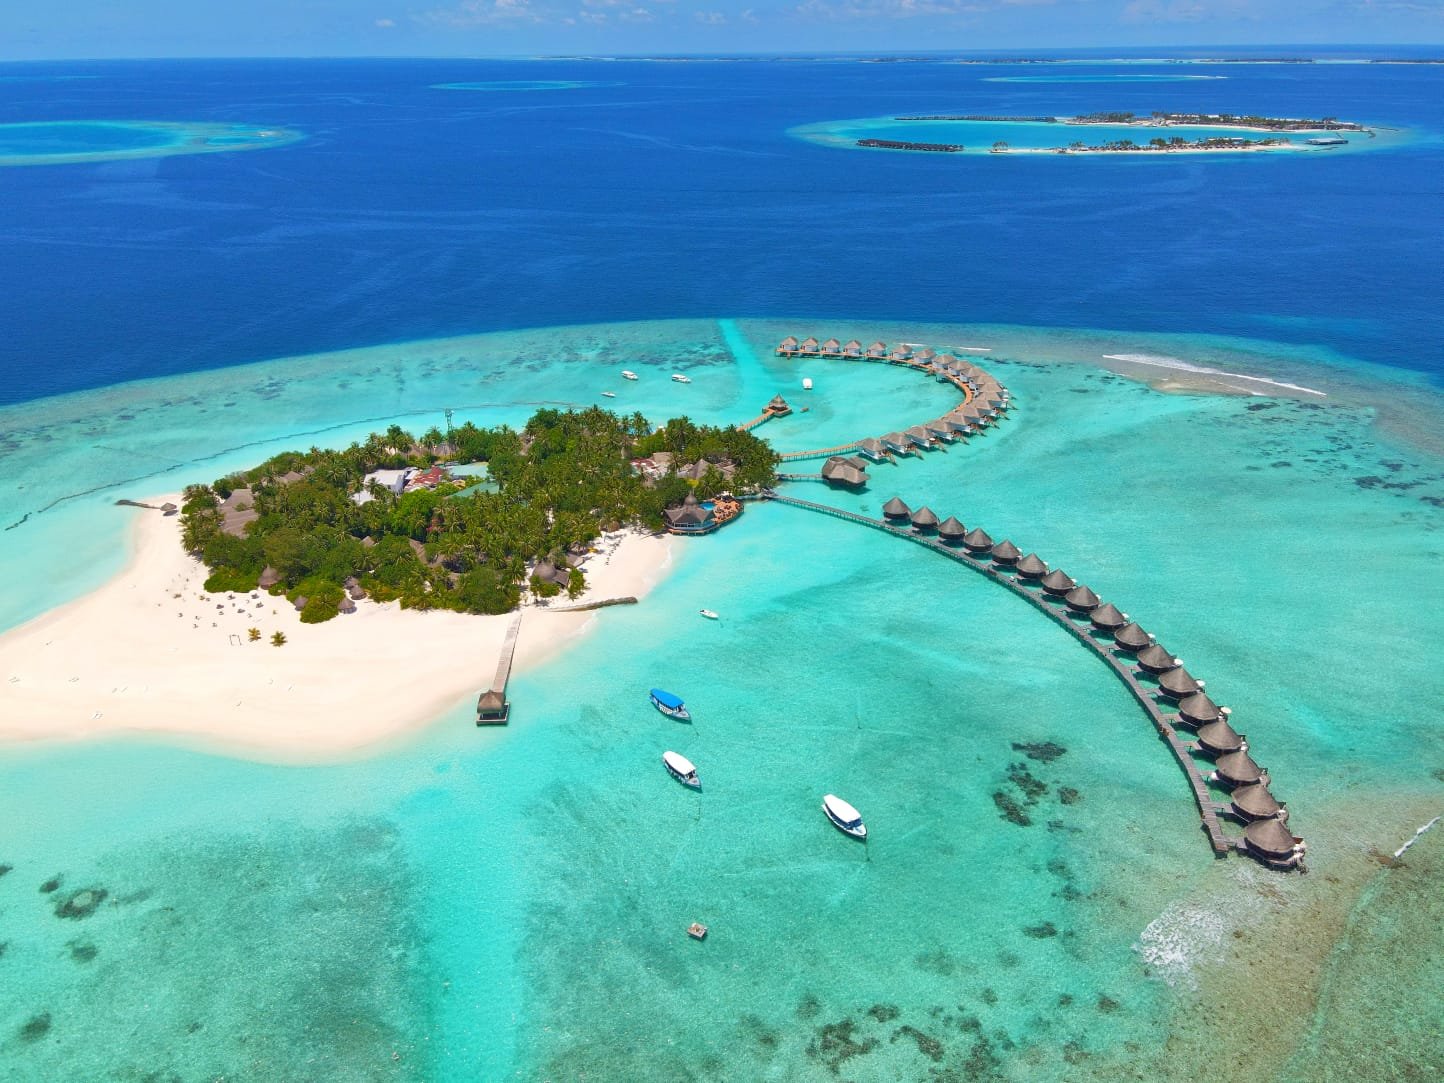 Maldives island package tour - Maldives all inclusive holiday package